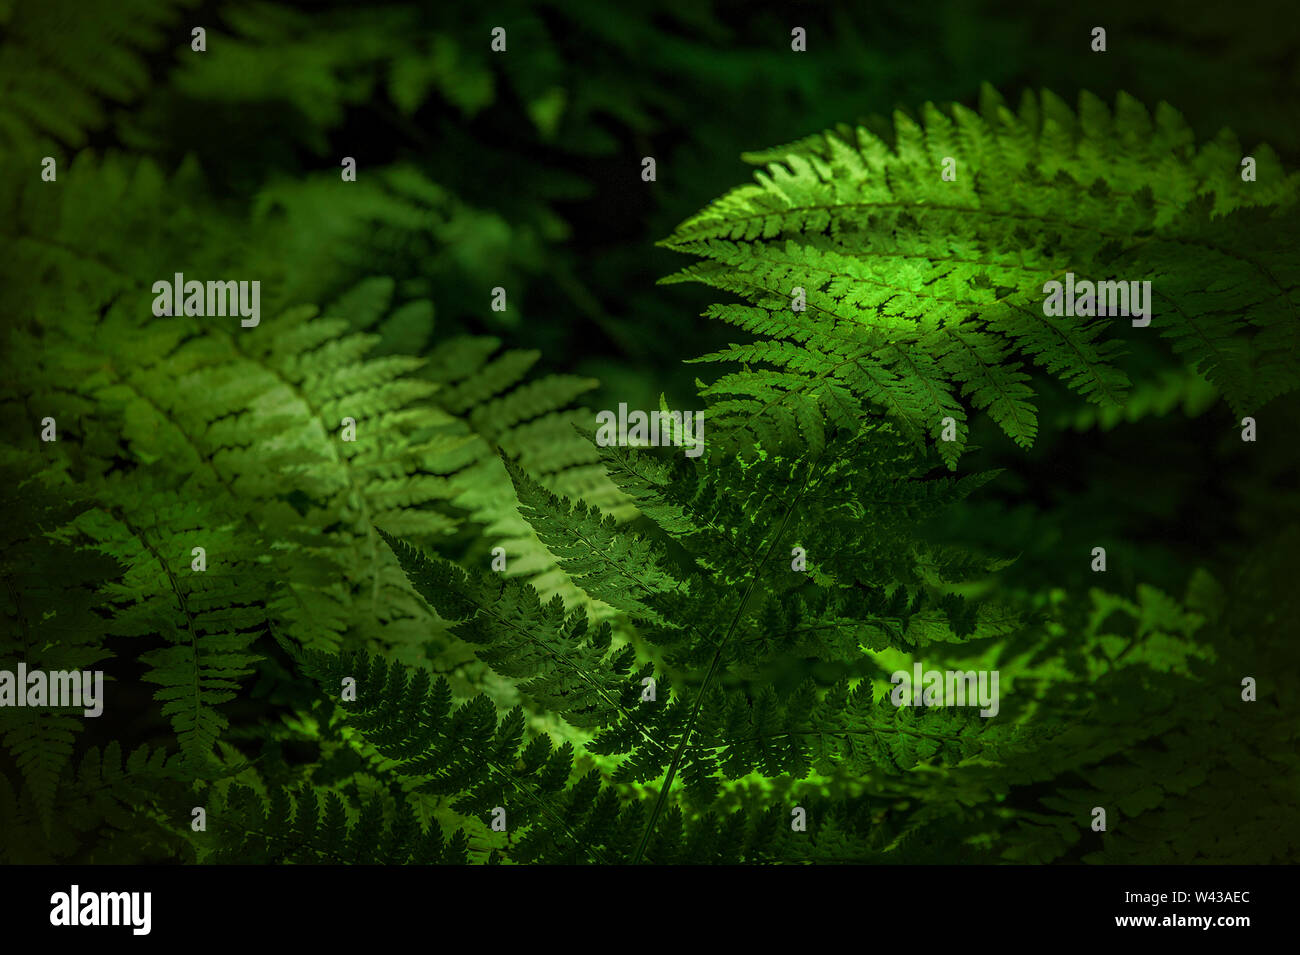 Wooded filtered sunlight highlights this close up of a bed of ferns. Stock Photo